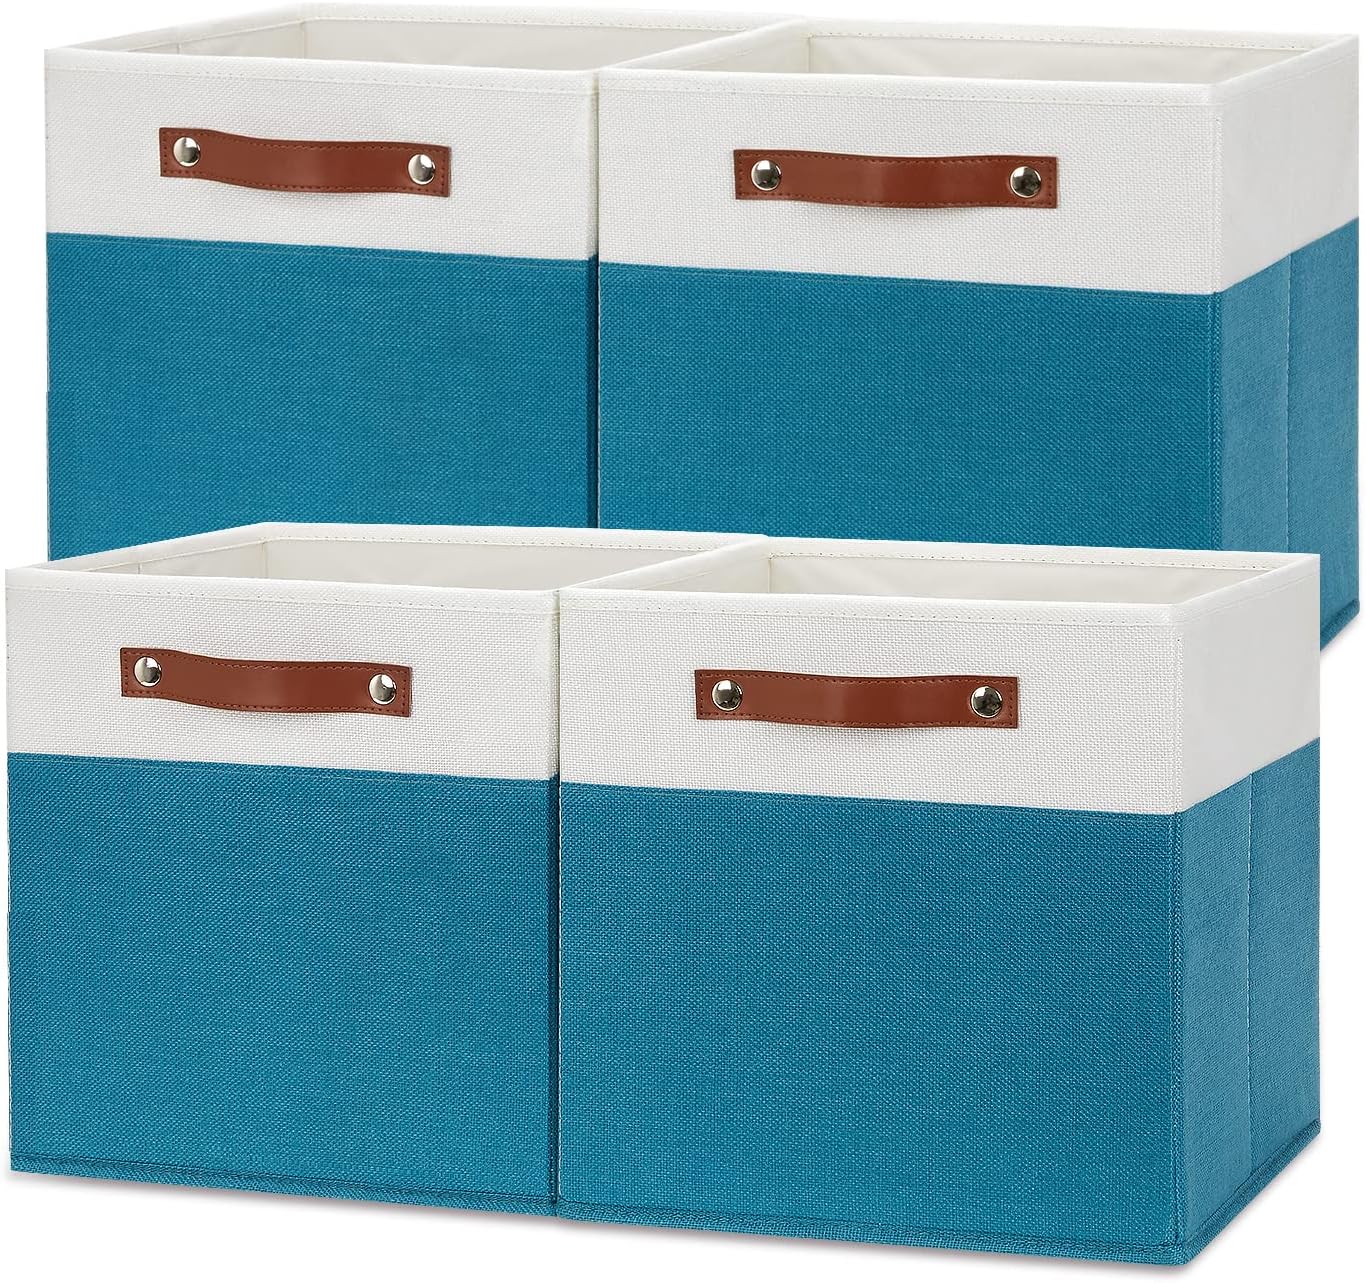 Temary Cube Storage Bins 12x12 Storage Cubes for Shelves Fabric Storage Baskets Cube Baskets for Closet with Leather Handles Cube Storage Organizer Bins (White&Teal)